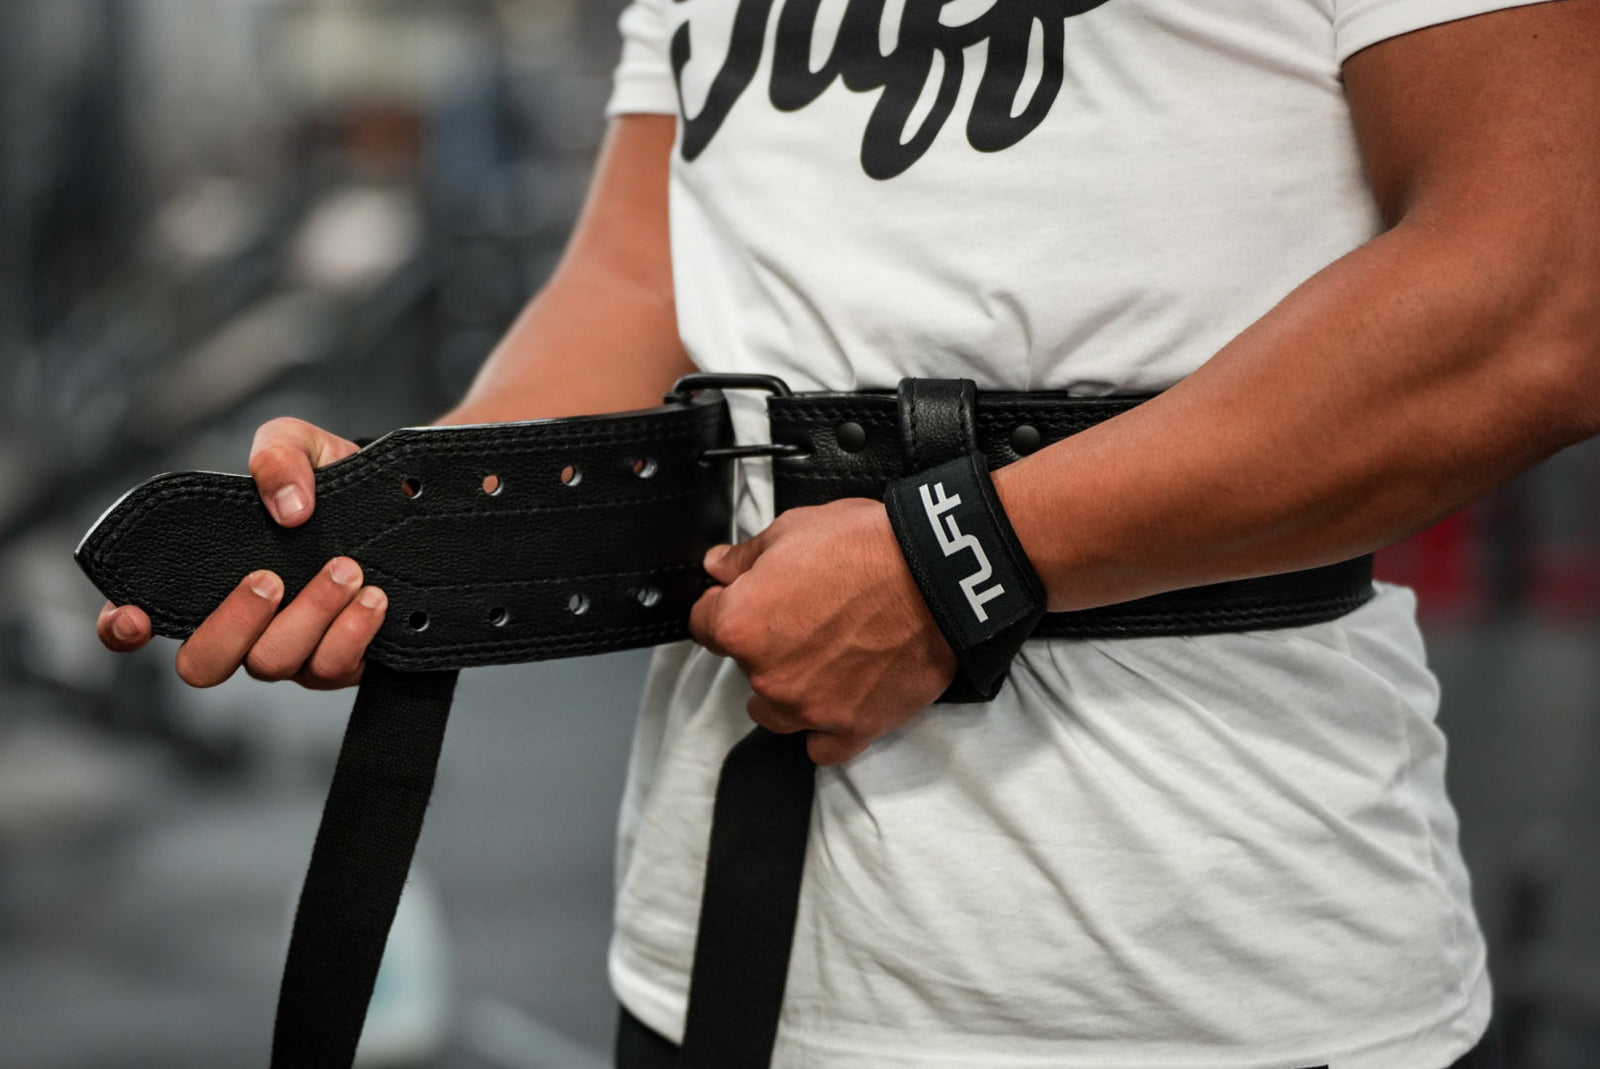 BRANK SPORTS® Finger Strap for Weightlifting or Crossfit to